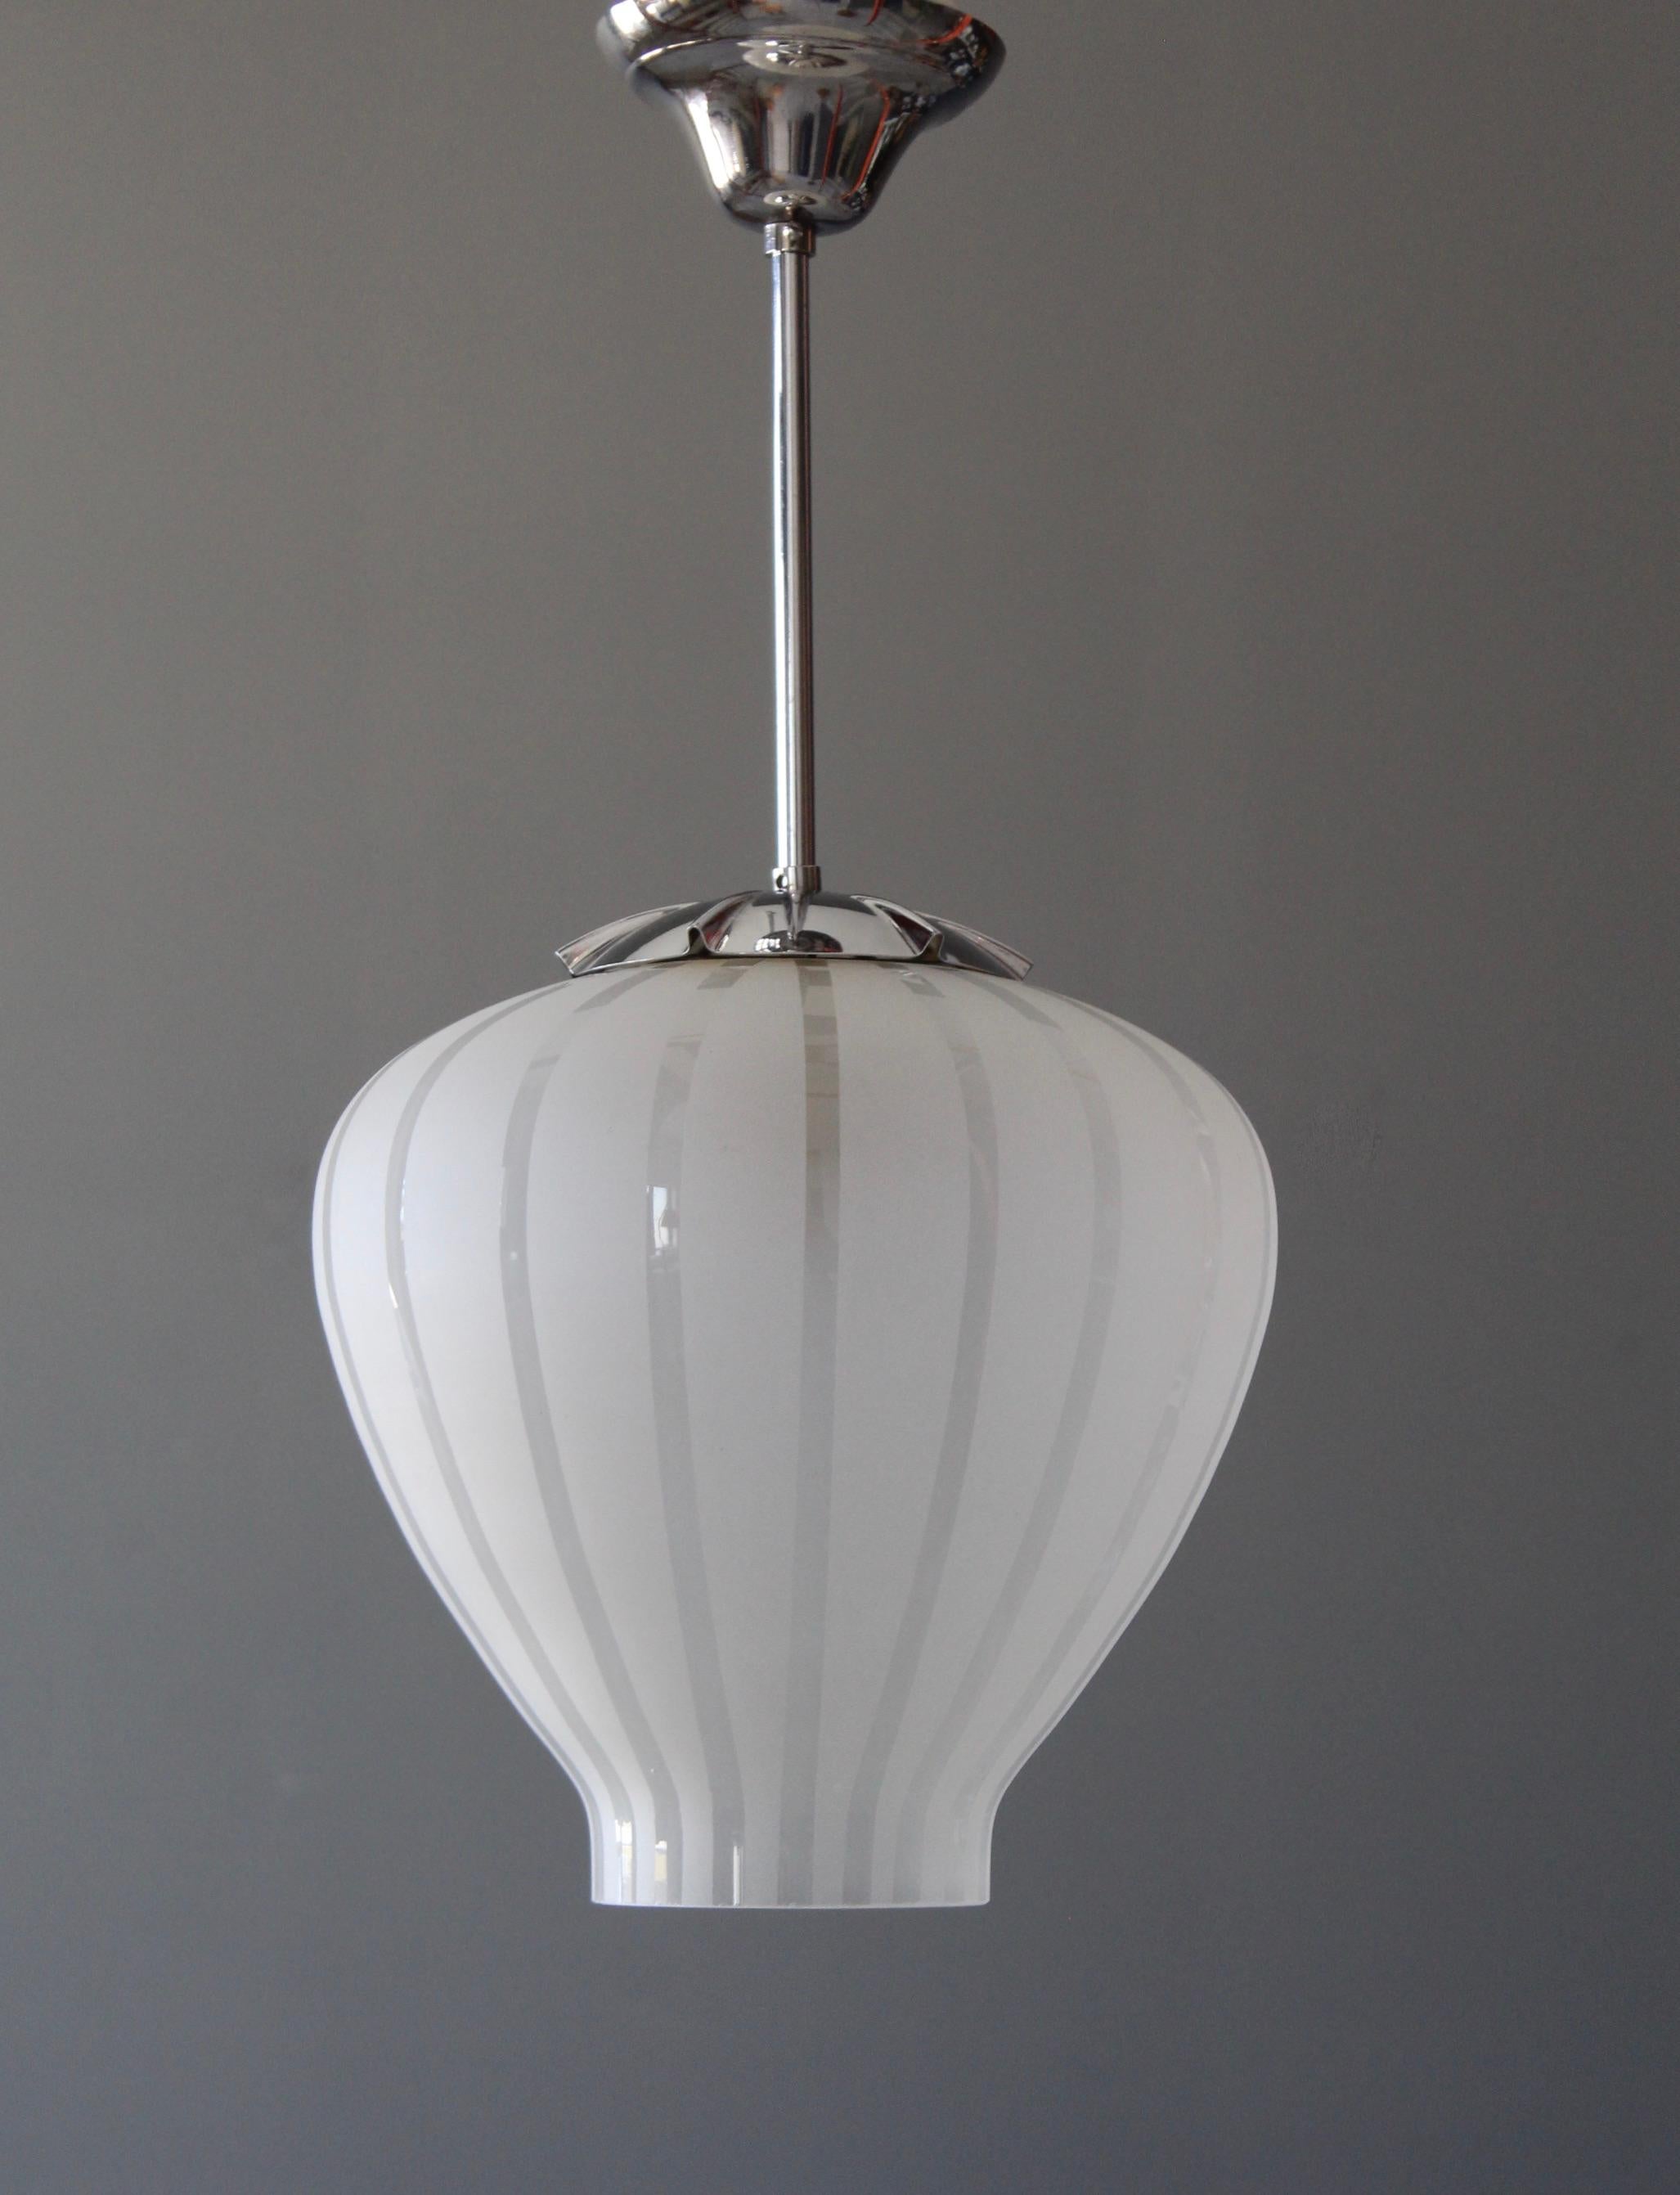 A pendant light. Design attributed to Gunnel Nyman, presumably manufactured by Orrefors, Sweden. Features frosted glass, metal. 

Height stated includes full drop.